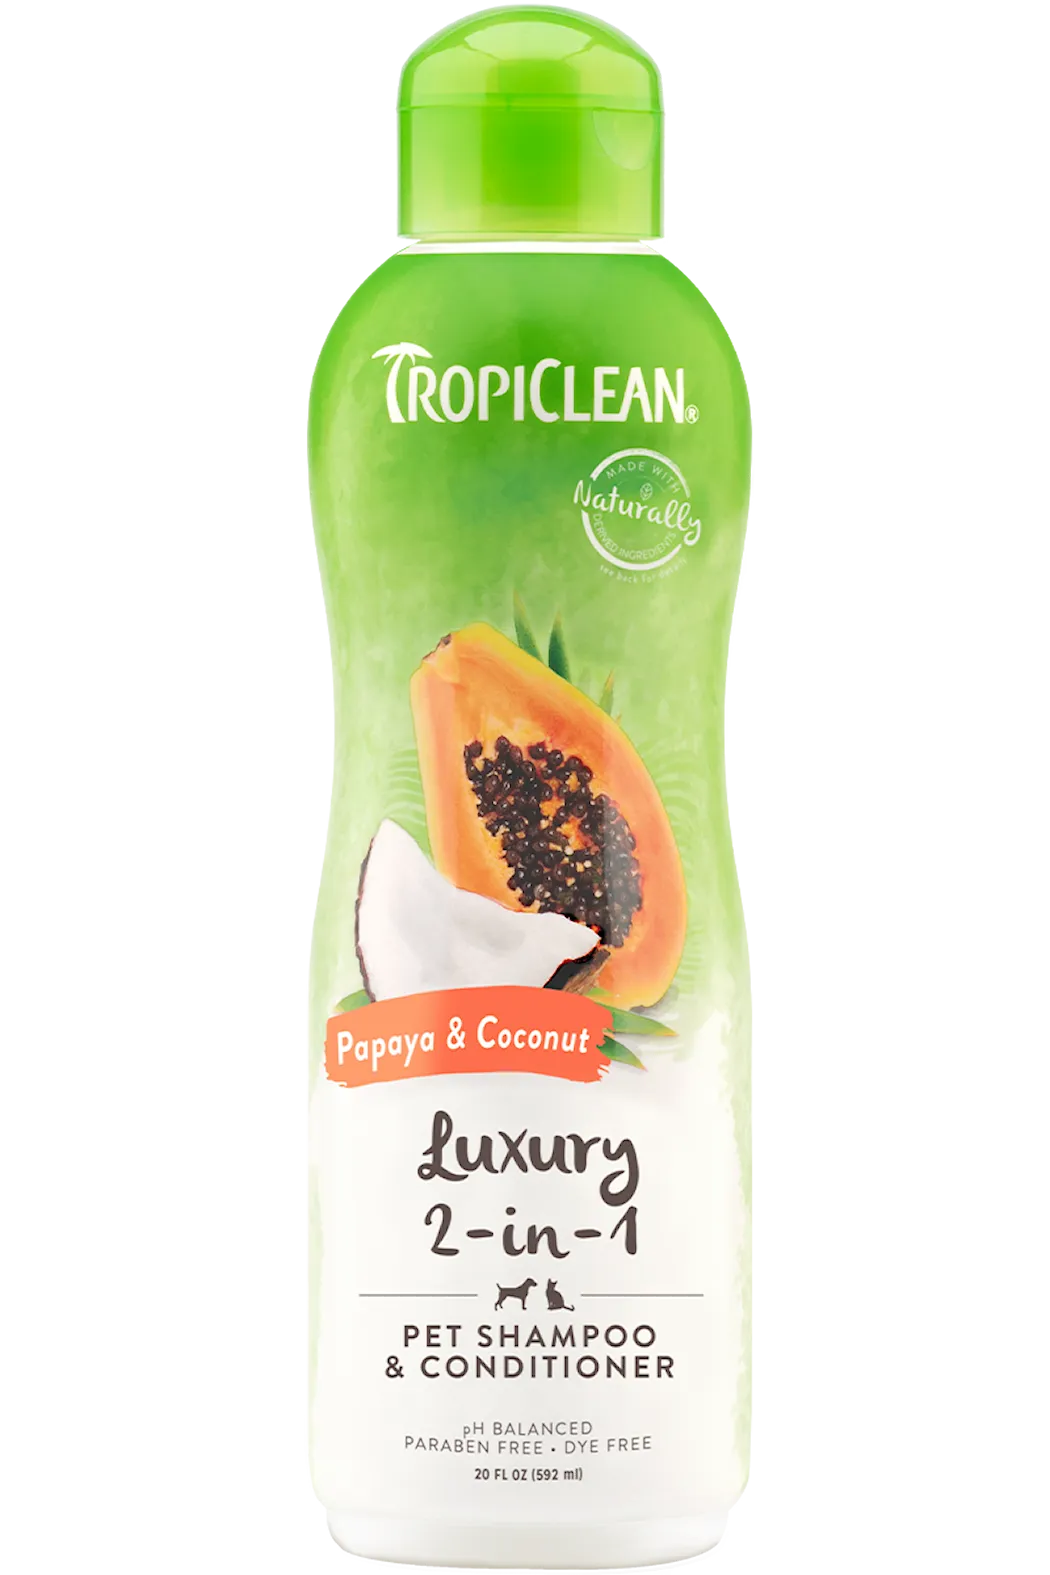 TropiClean Papaya & Coconut Luxury 2-in-1 Shampoo and Conditioner for Pets 355 ml